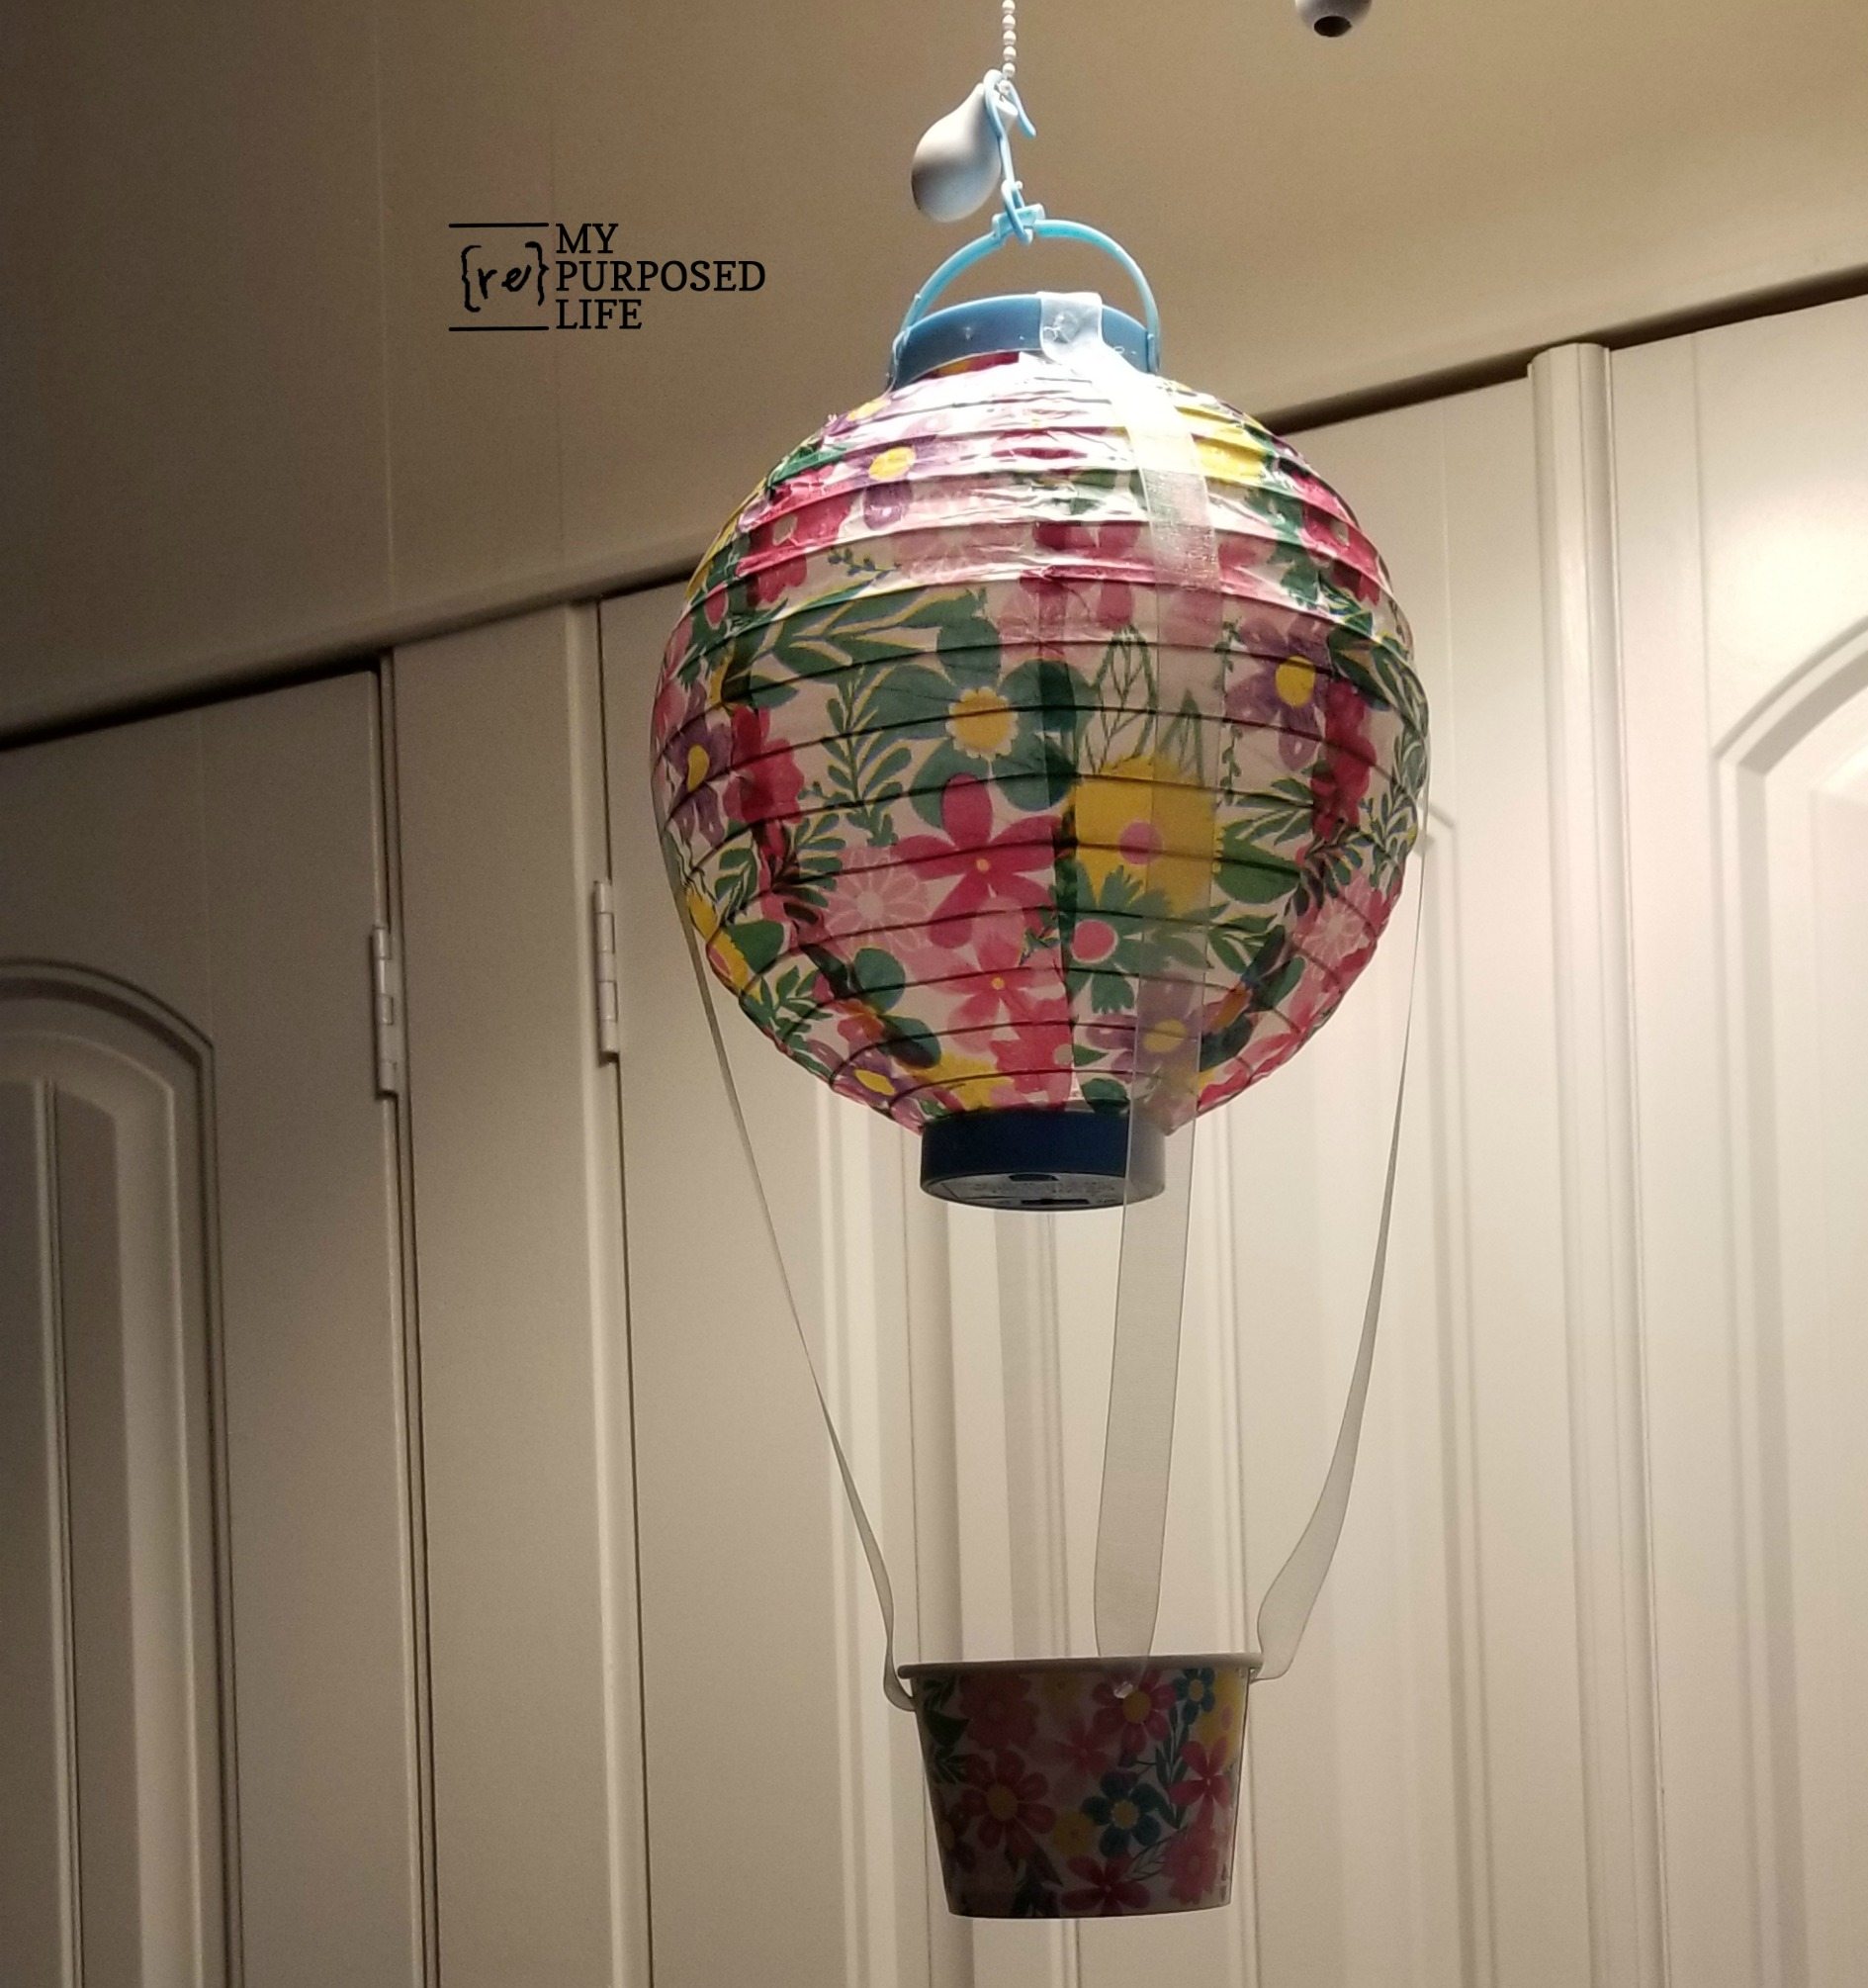 Upcycled Lanterns from Kids' Art - The Imagination Tree